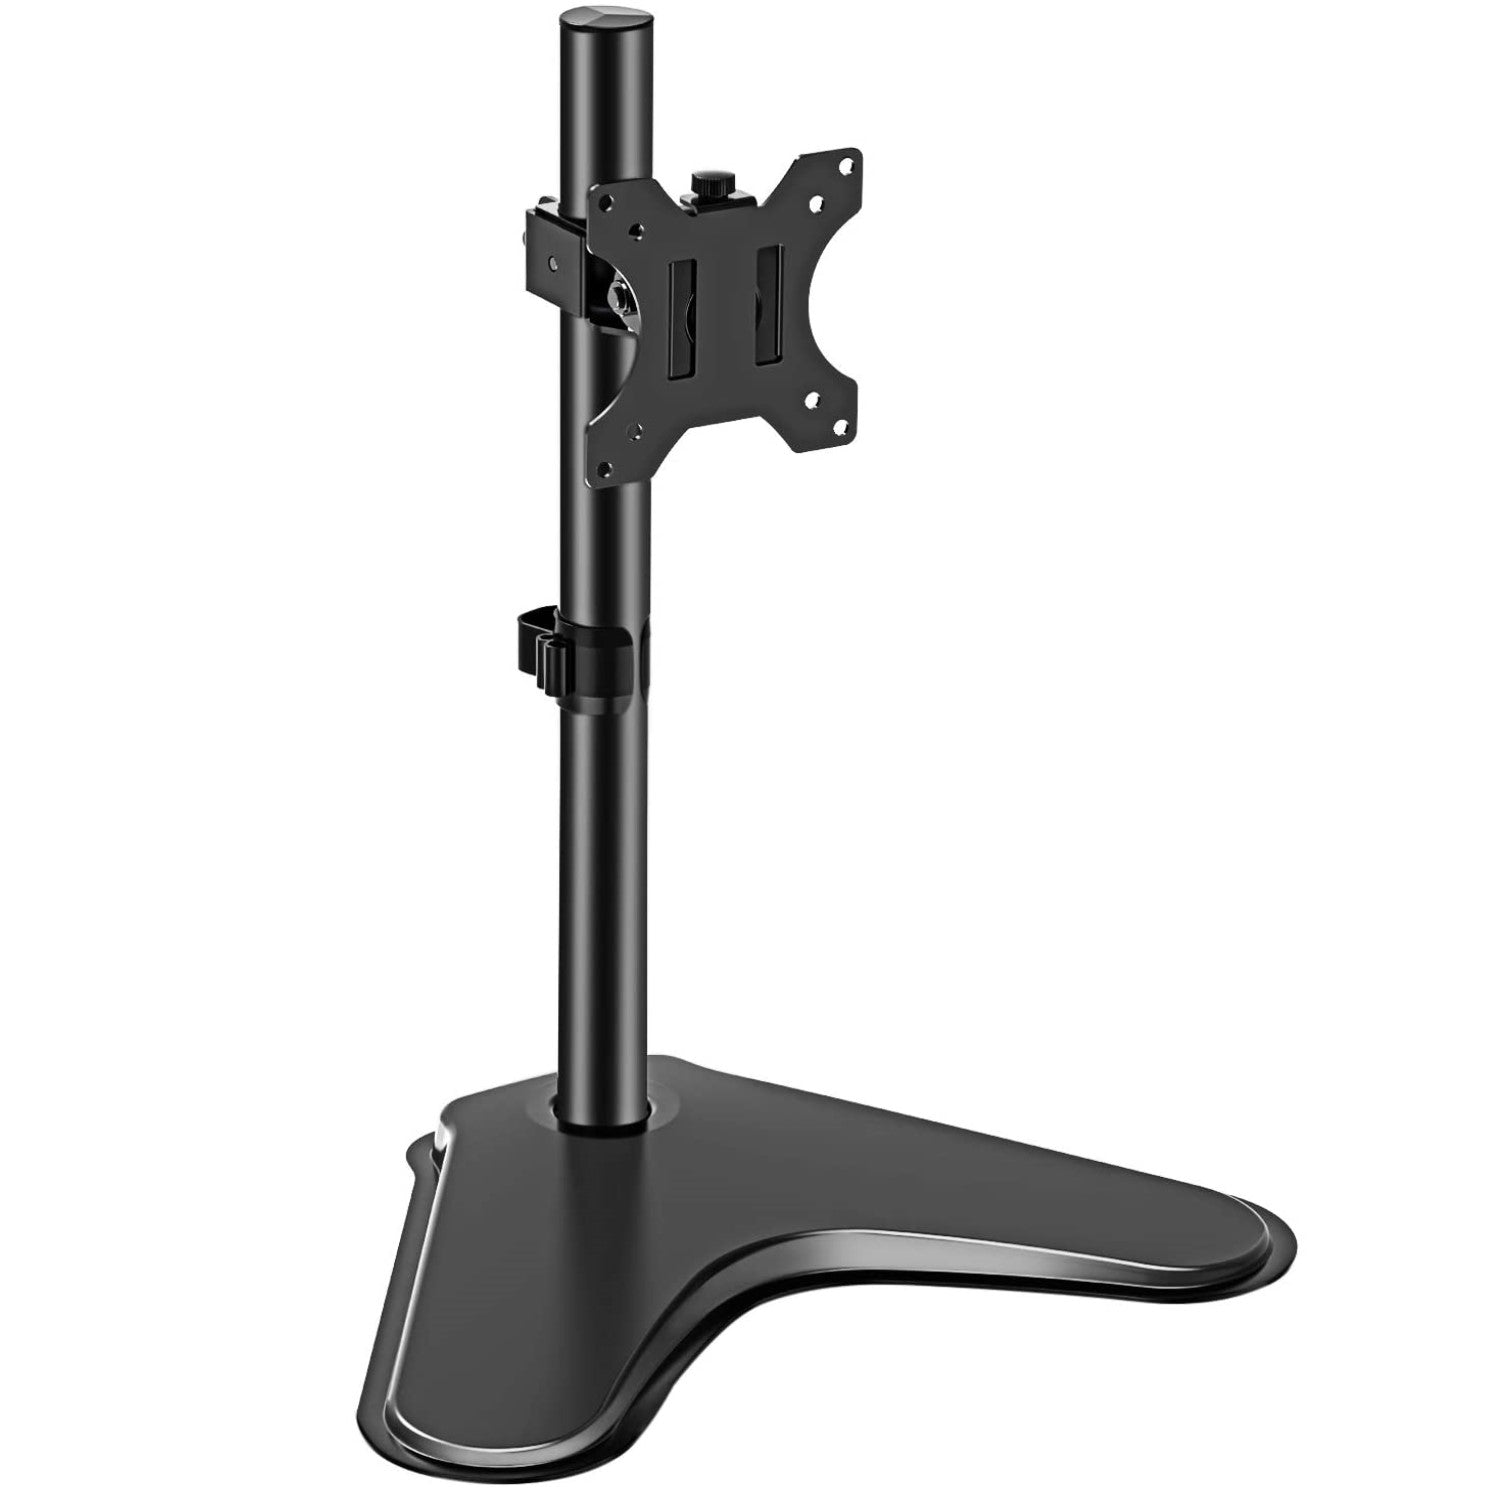 MOUNT PRO Single Monitor Desk Stand for 17" to 32" LCD Computer Screens